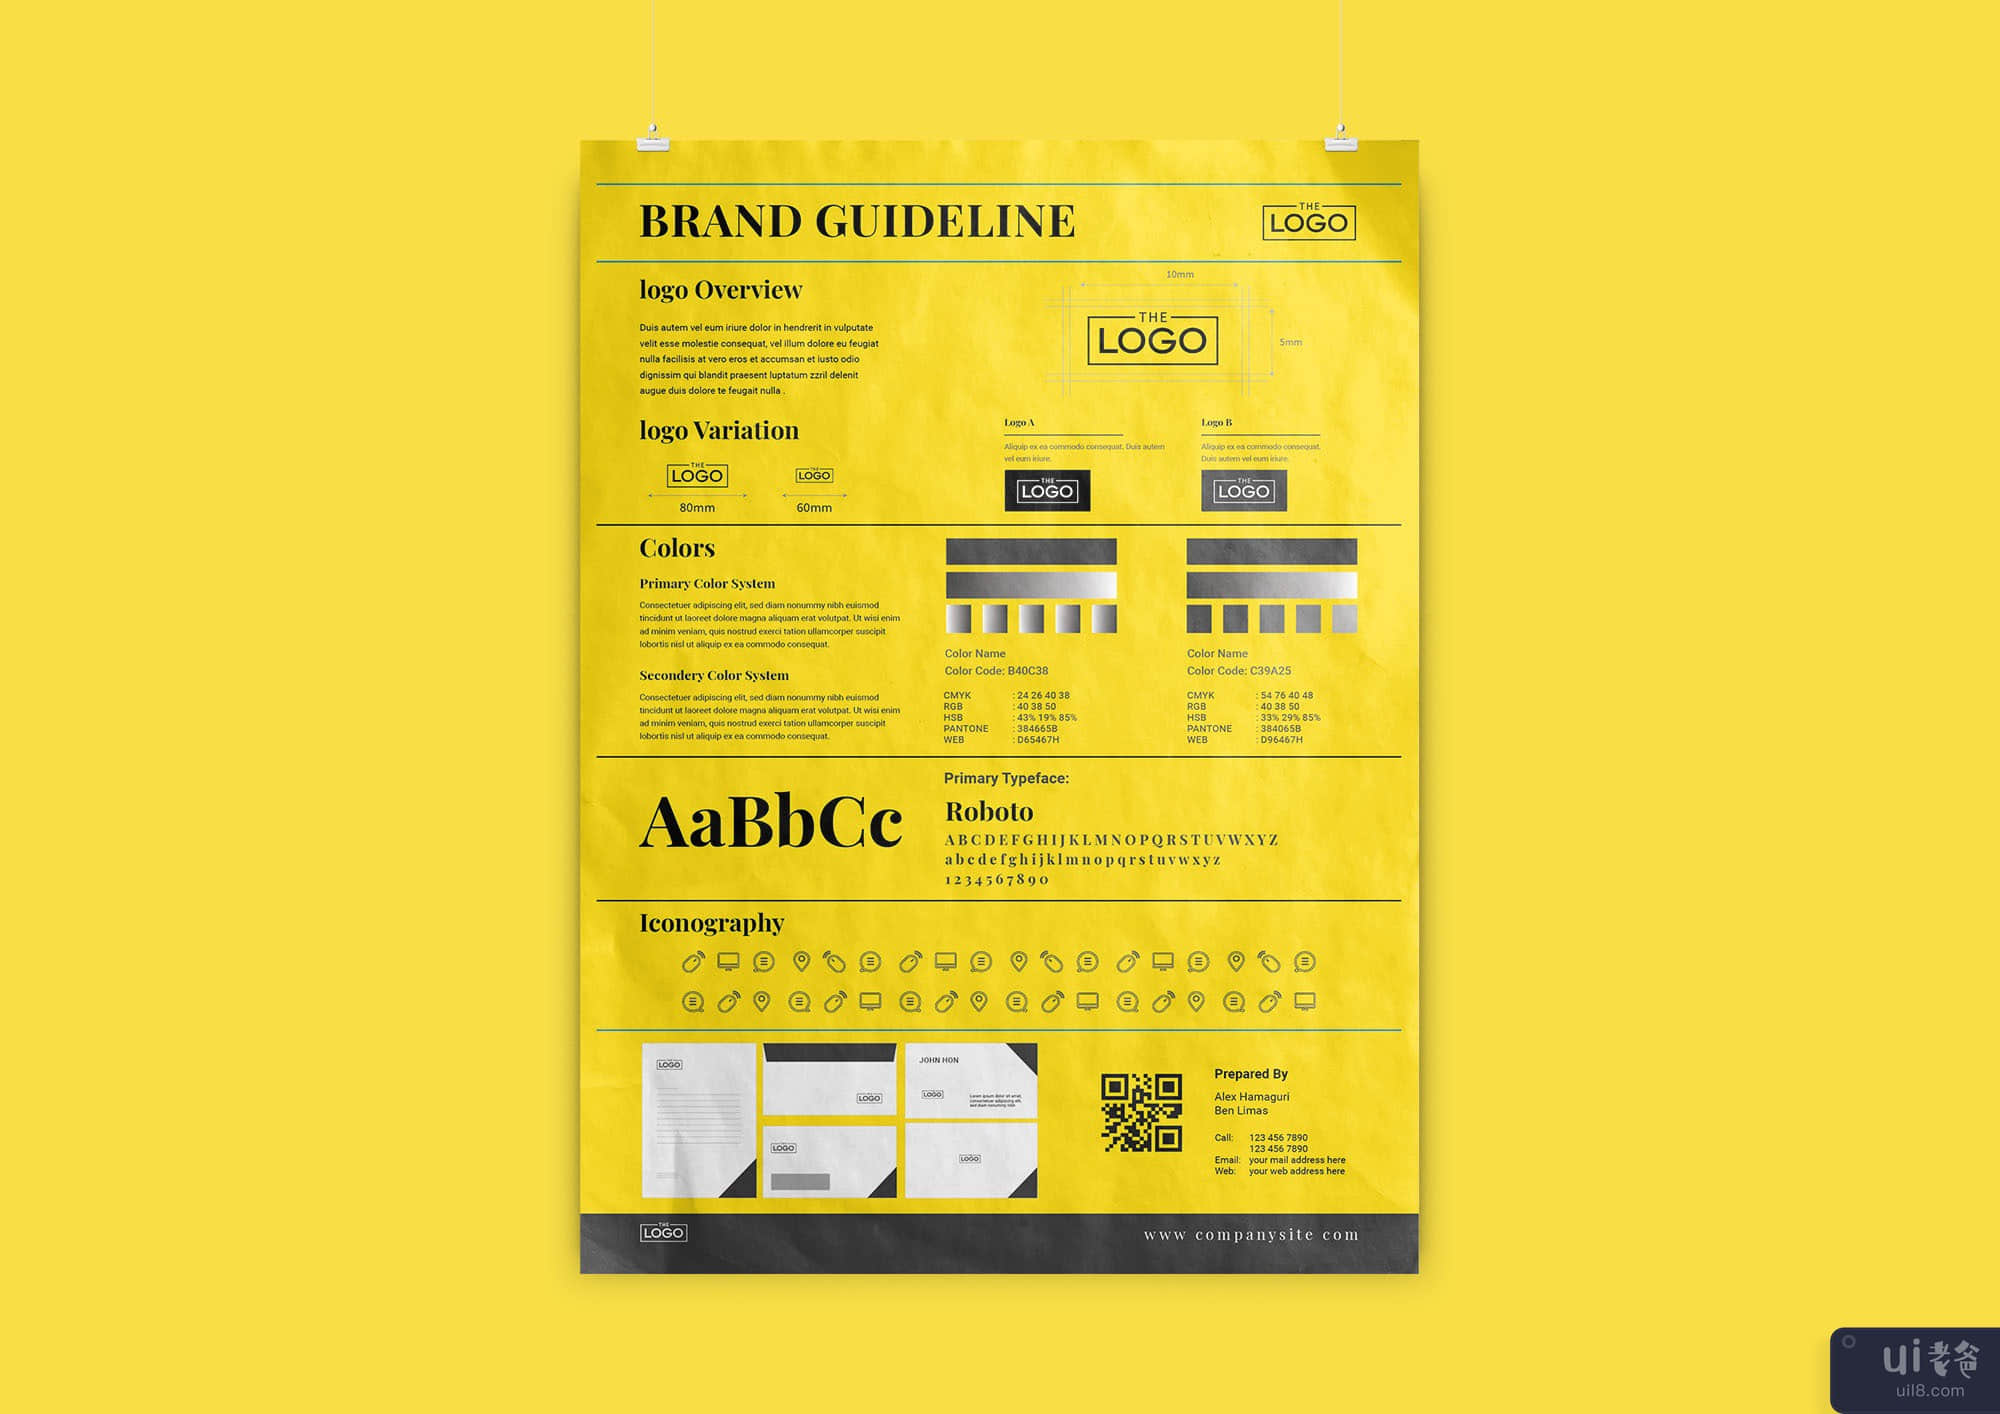 A3 品牌指南海报 Din A3 品牌指南海报(A3 Brand Guideline poster Din A3 Brand Guideline poster)插图2